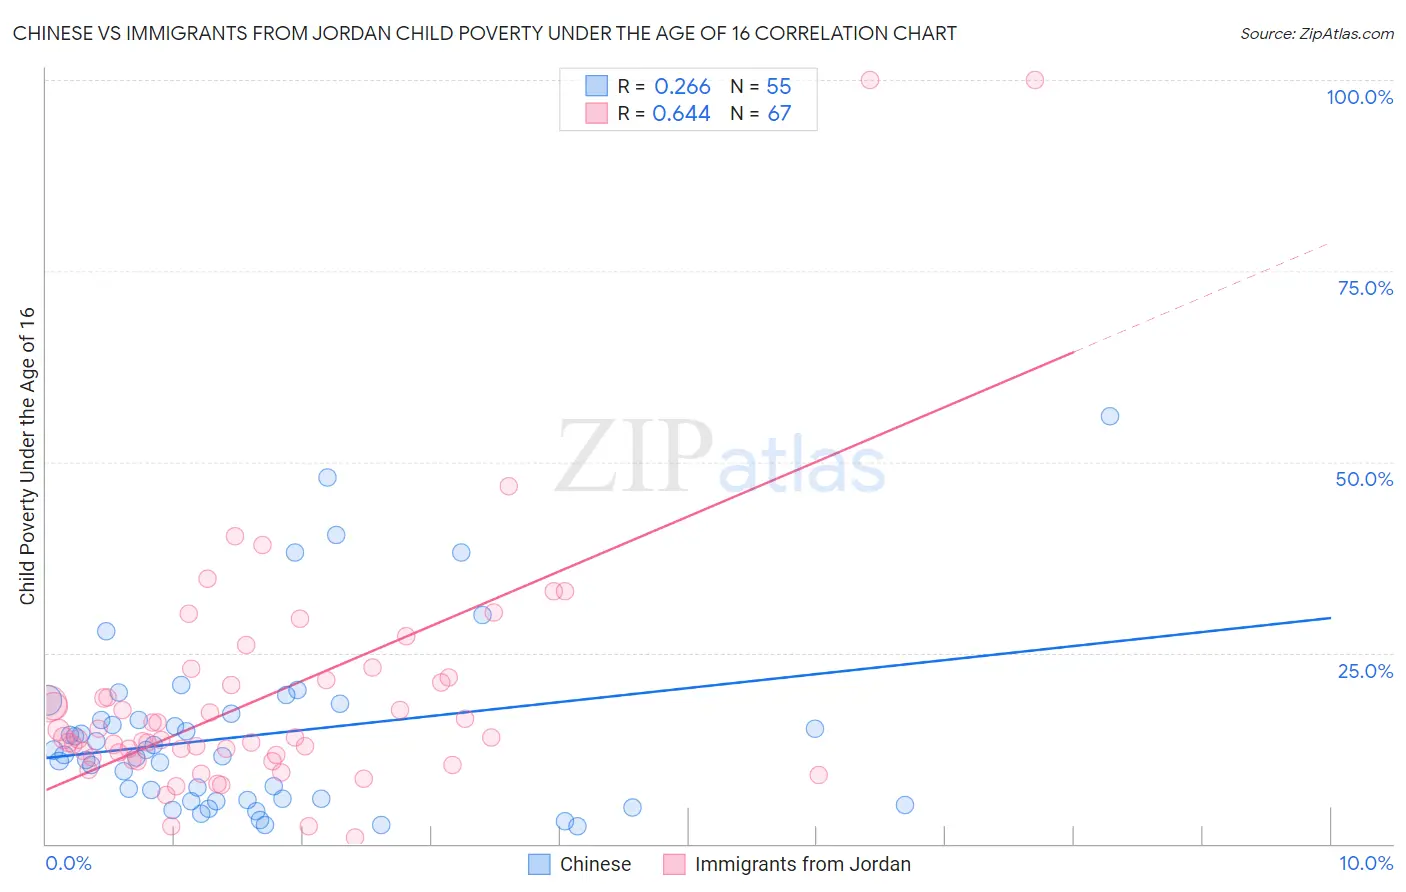 Chinese vs Immigrants from Jordan Child Poverty Under the Age of 16